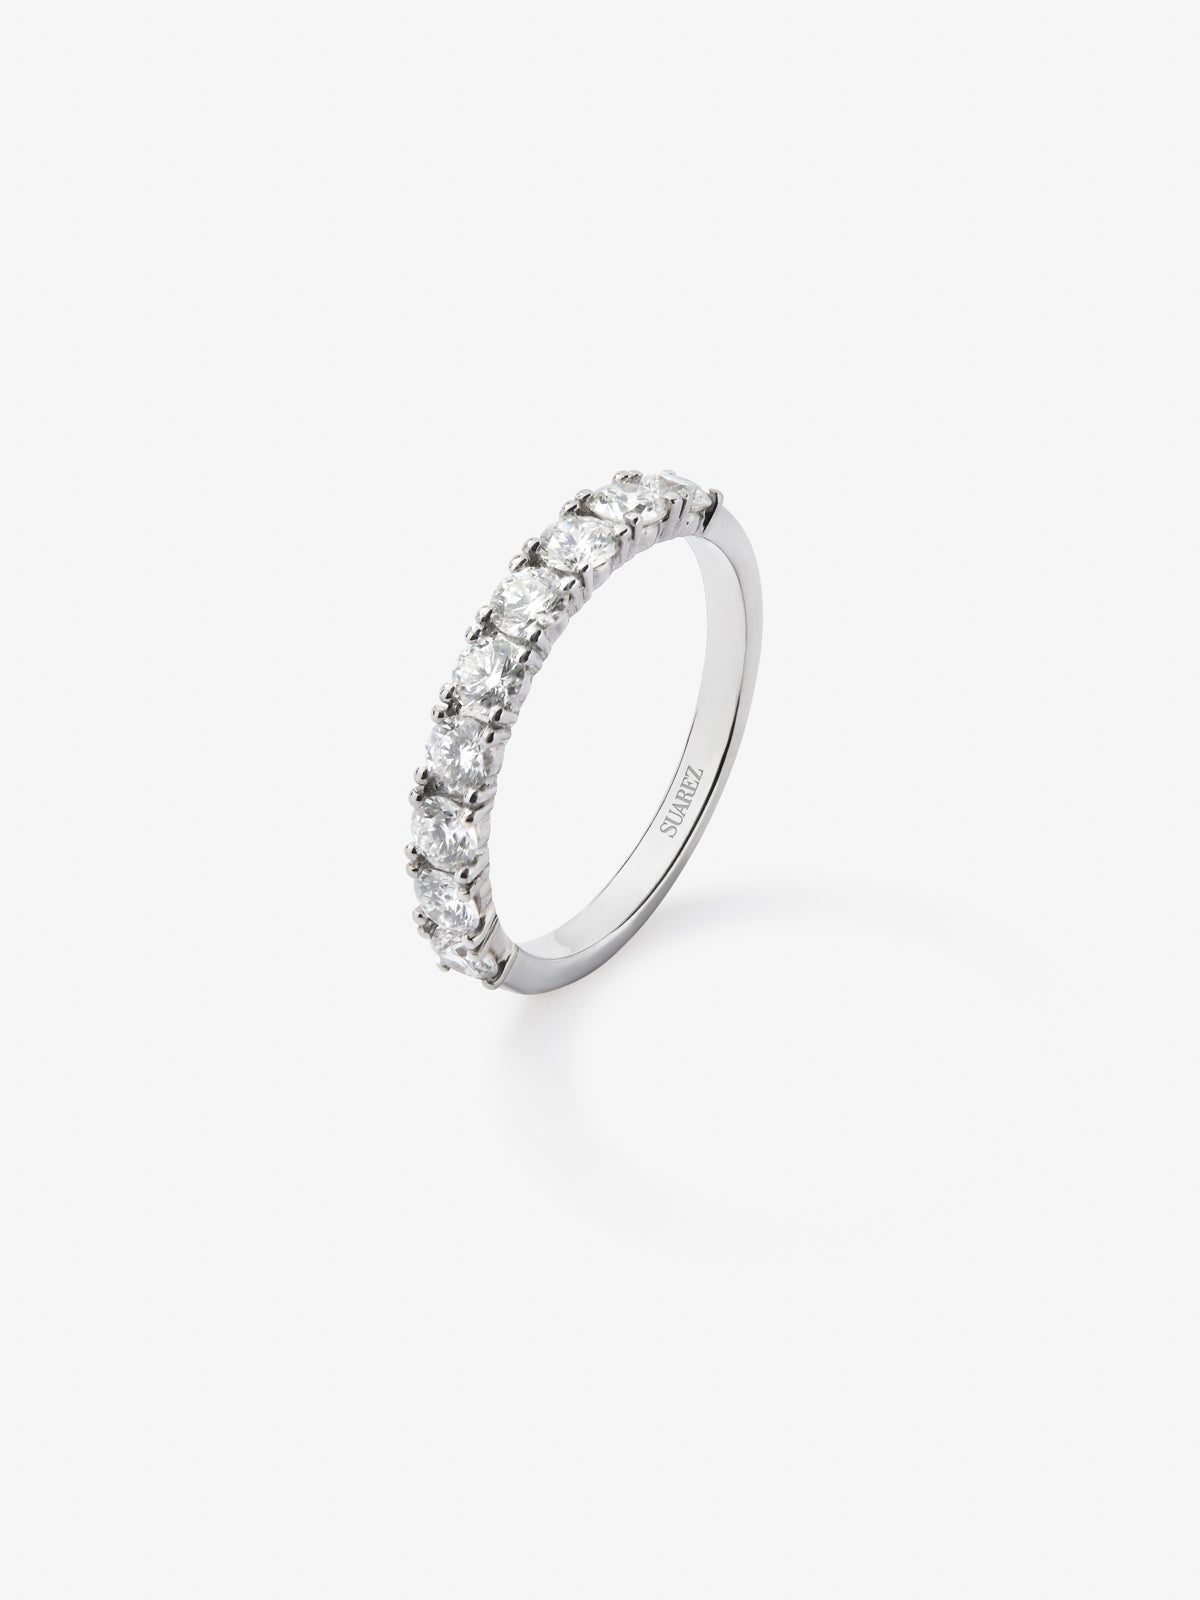 Half ring in 18K white gold with 10 brilliant-cut diamonds with a total of 0.74 cts